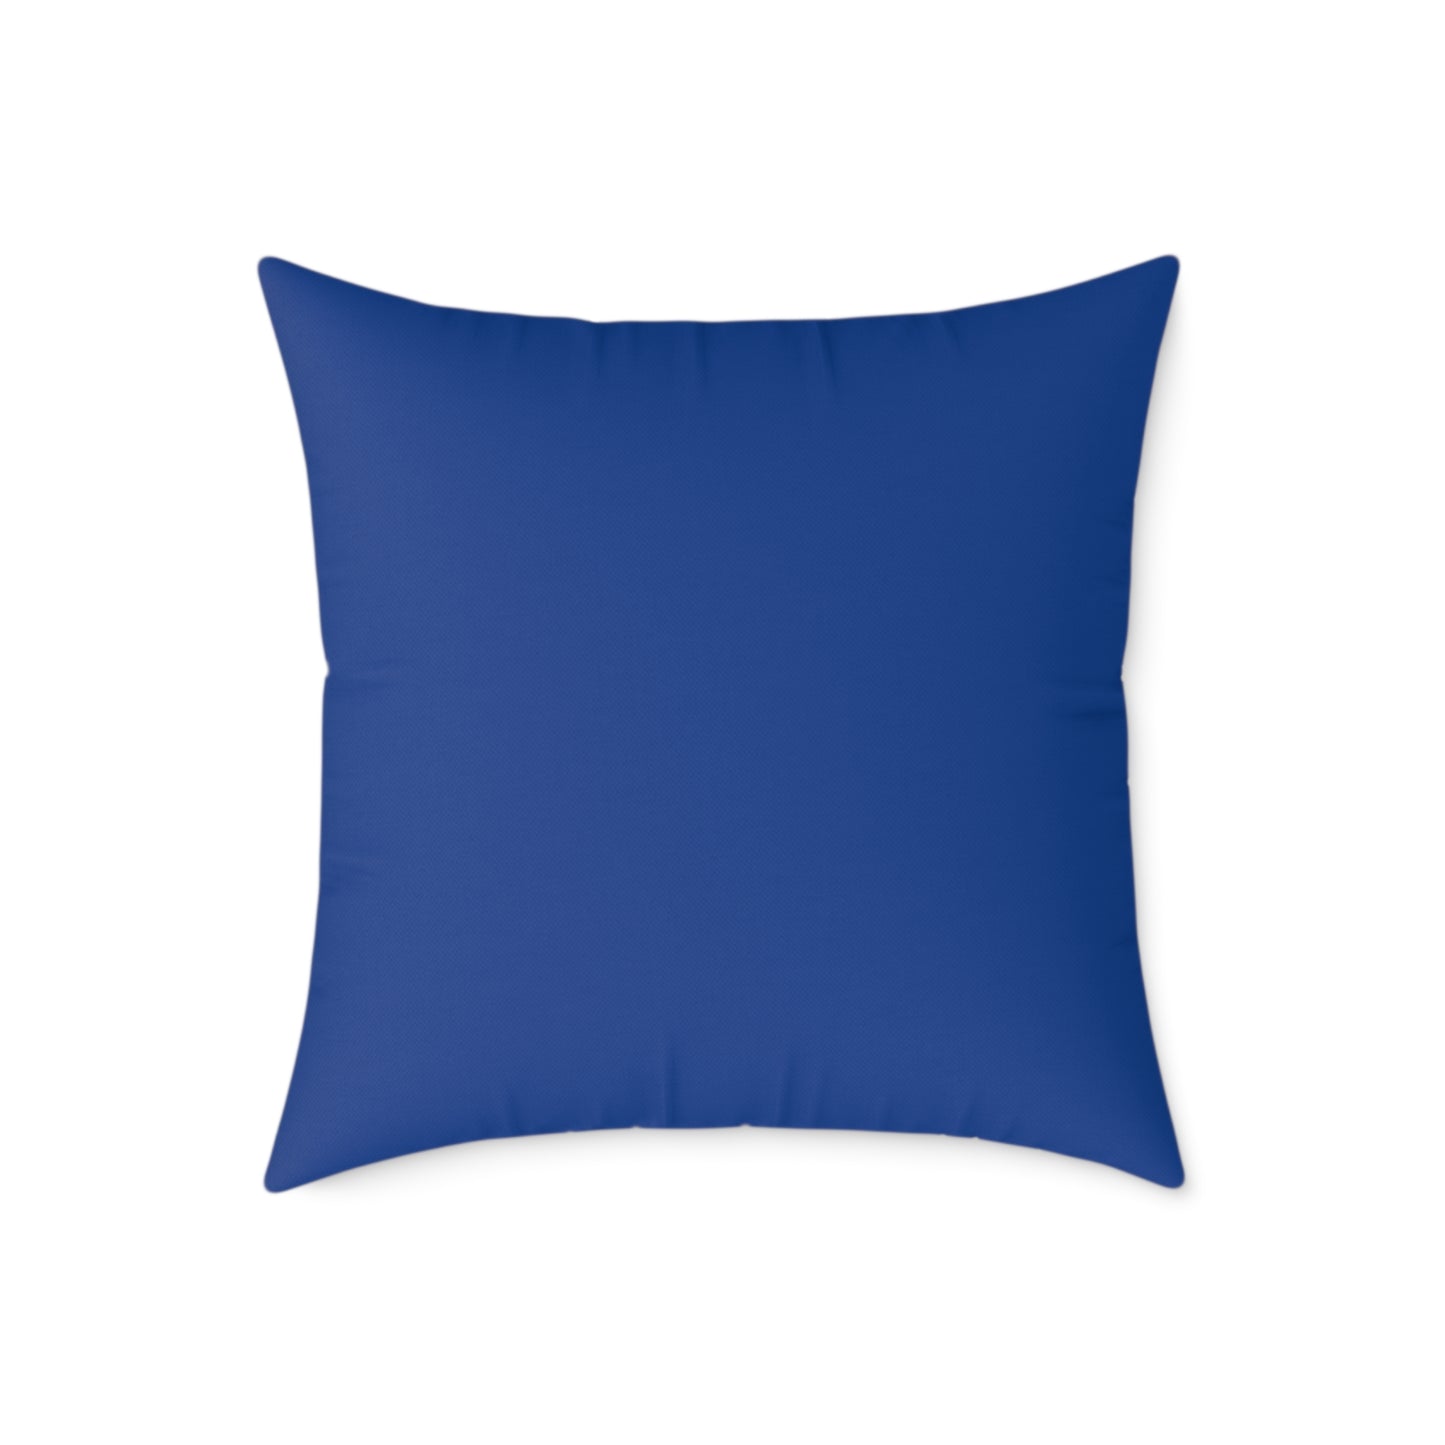 Streaming with the Elements Polyester Pillow